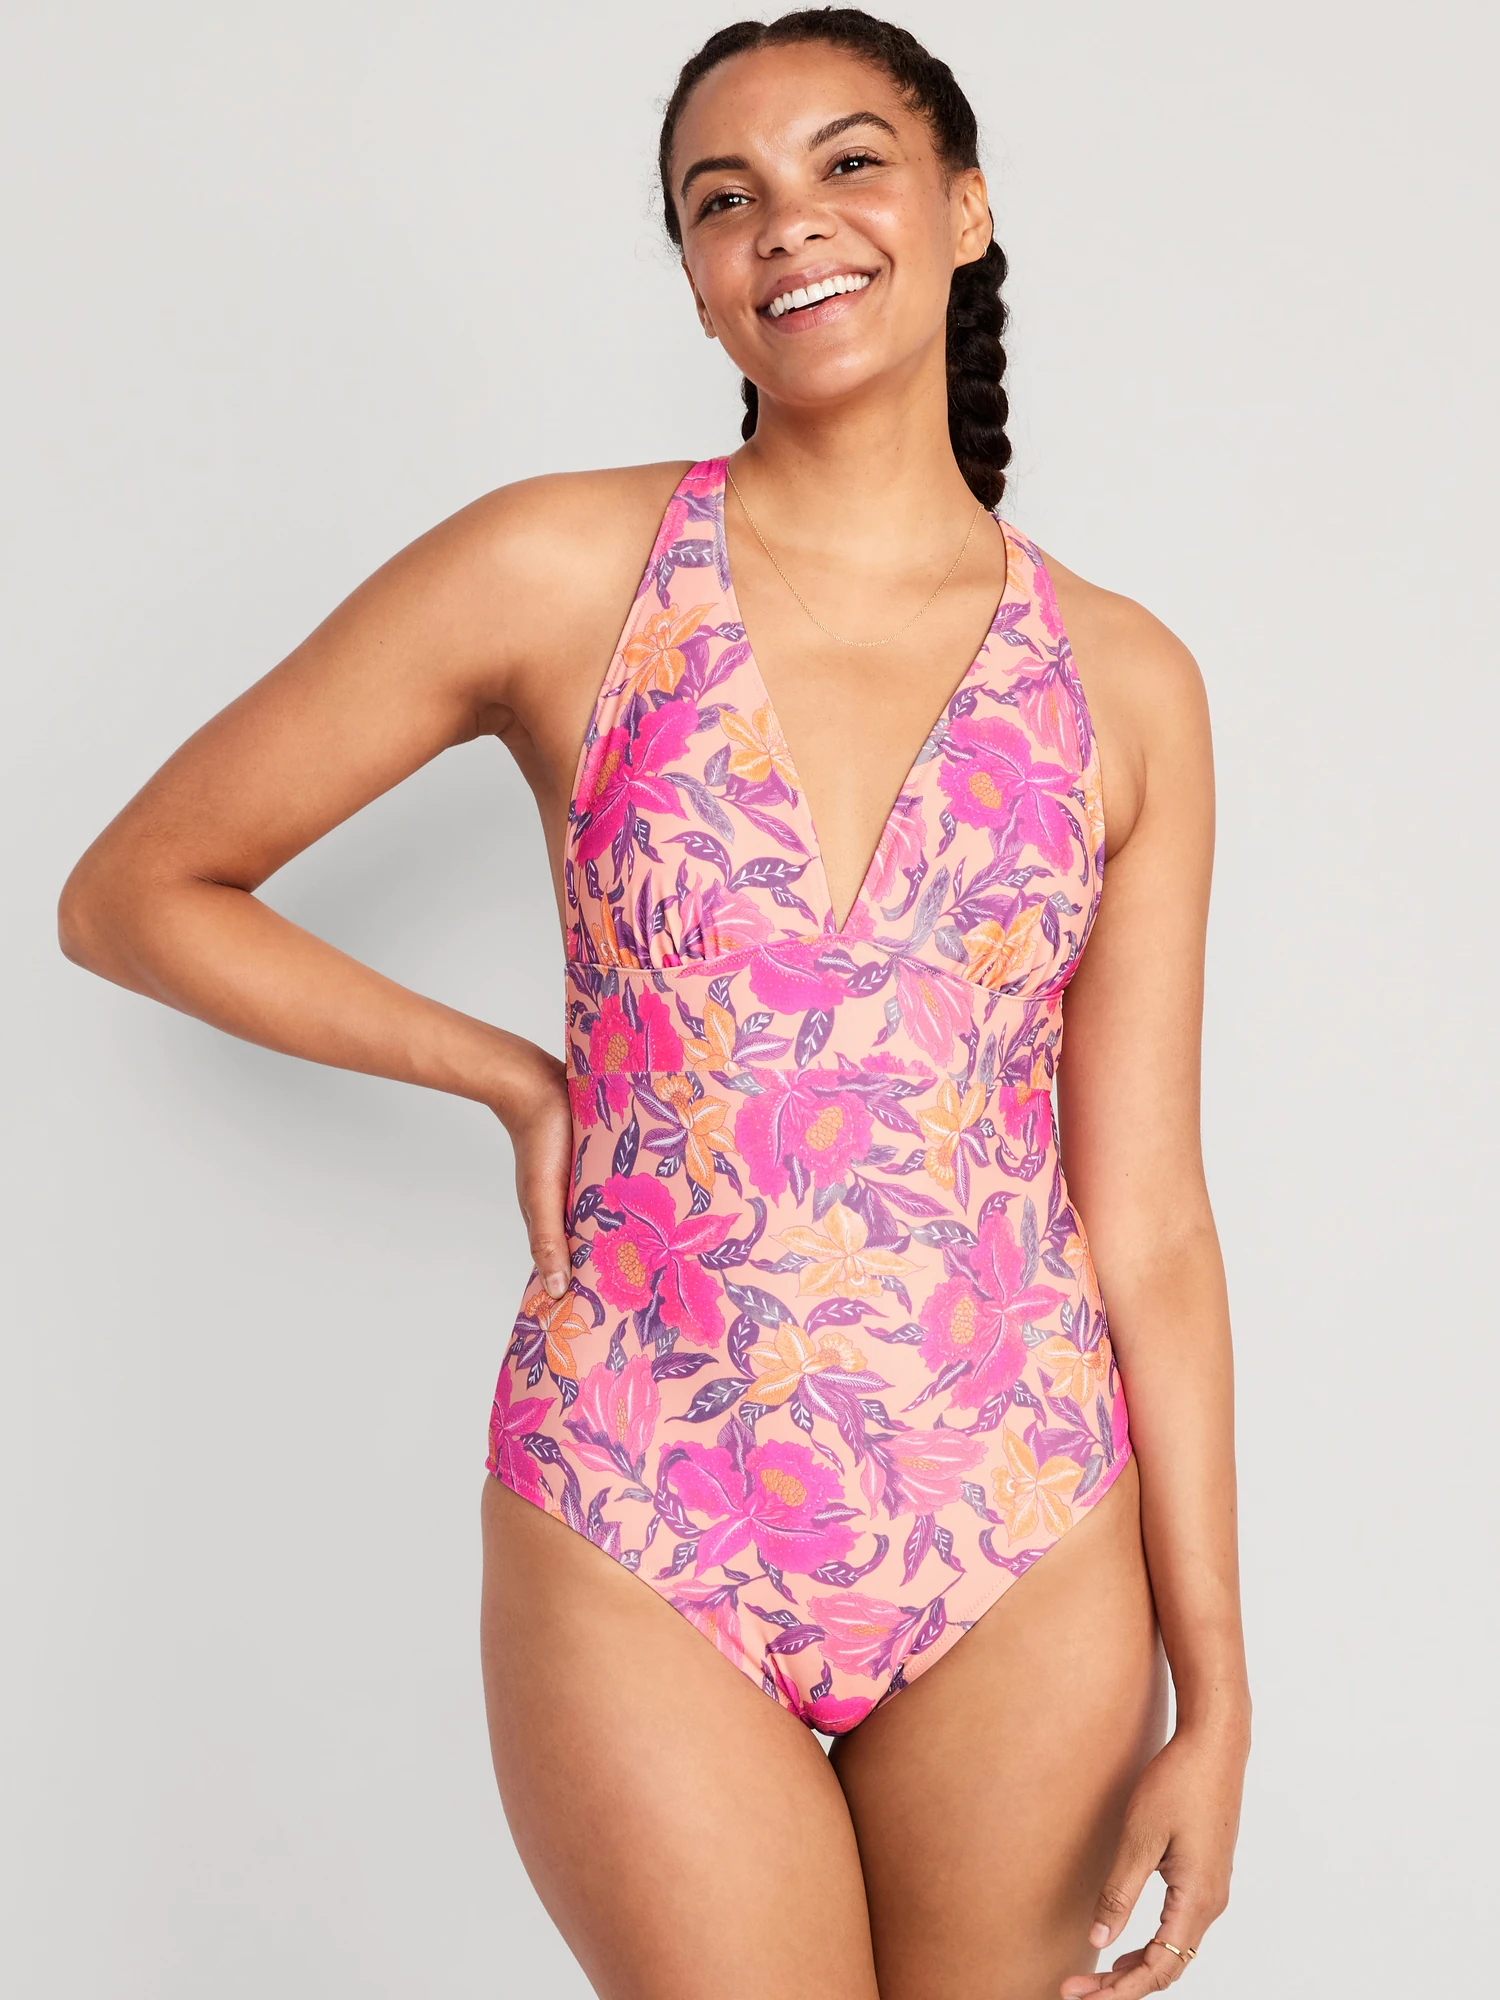 25 Best One-Piece Swimsuits for Moms